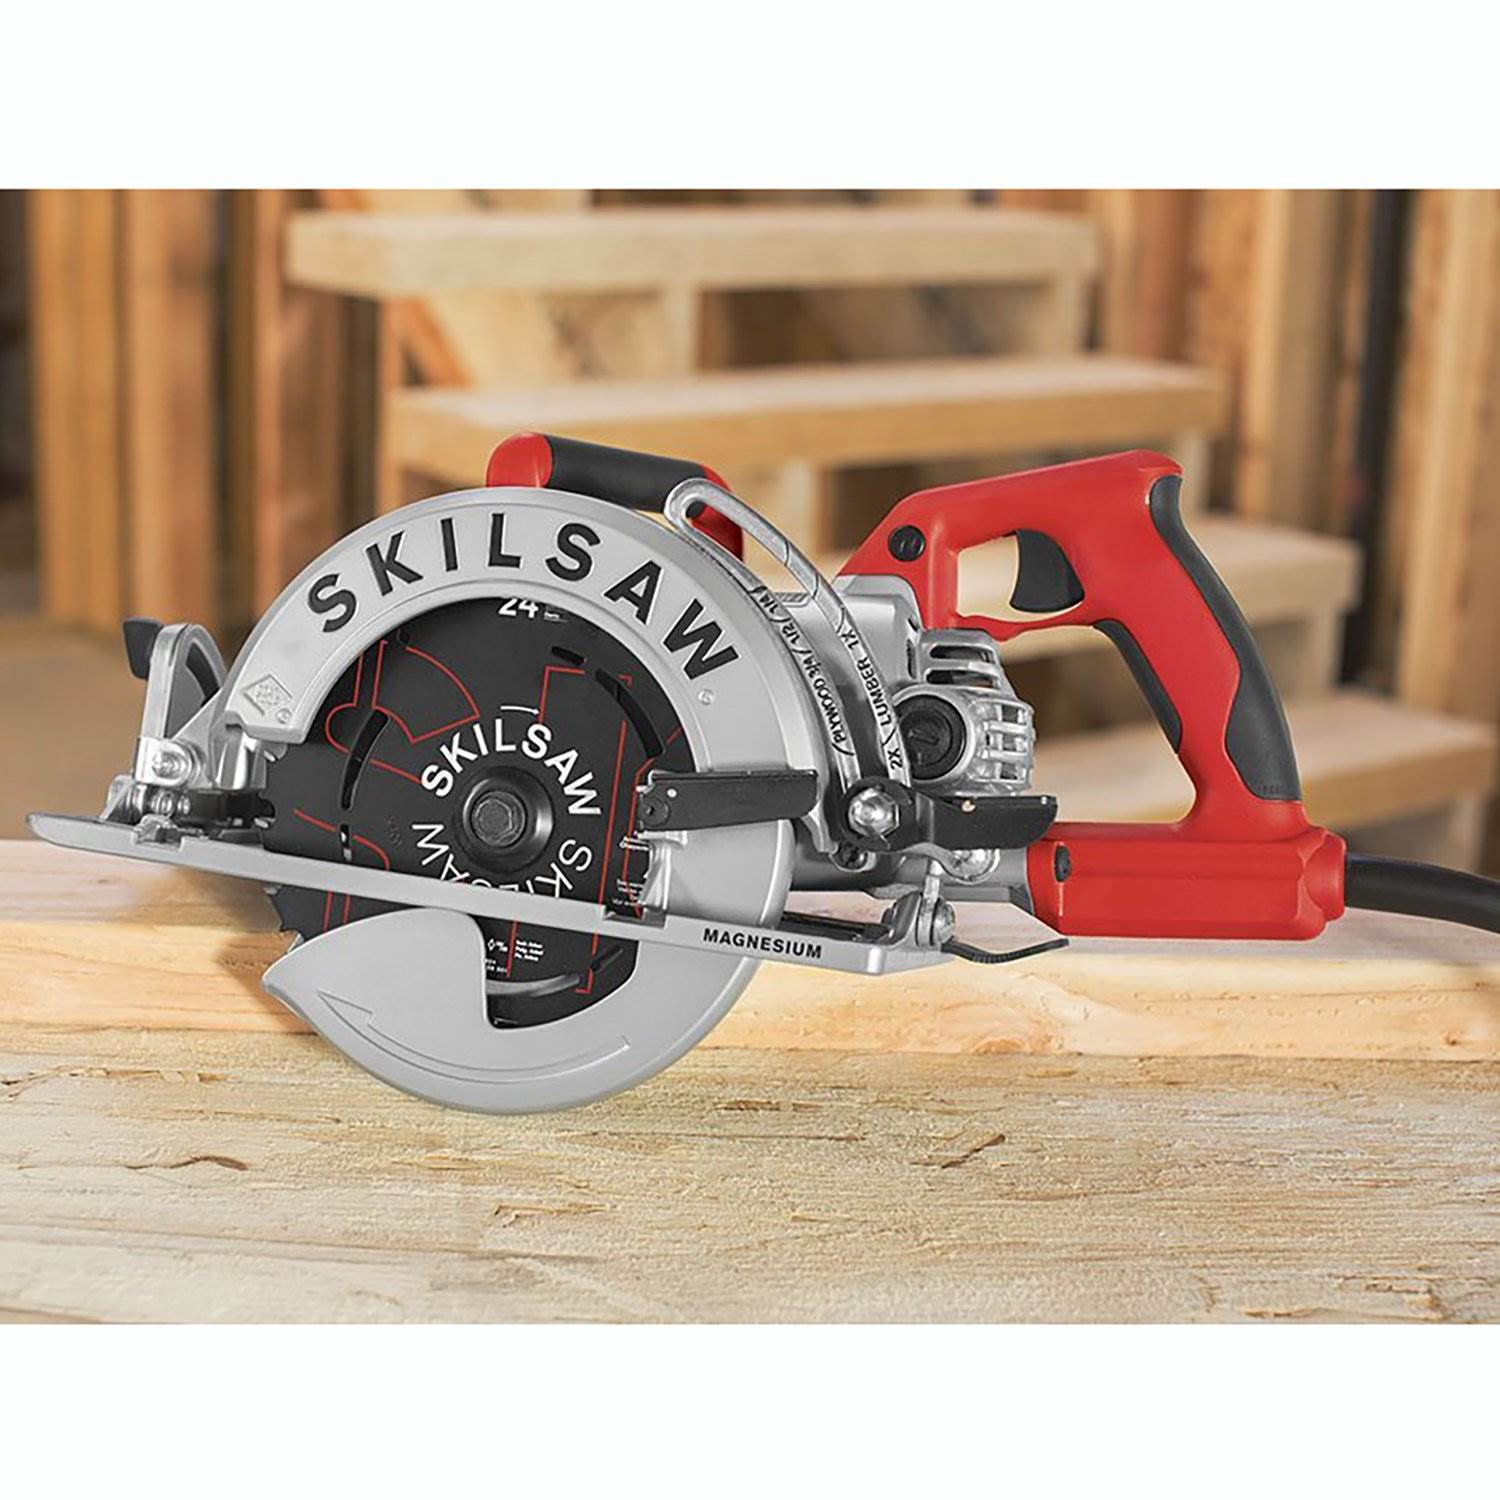 SKIL SPT77WML-01 7-1/4" Lightweight 15Amp Corded Magnesium Worm Drive Circular Saw - image 4 of 7